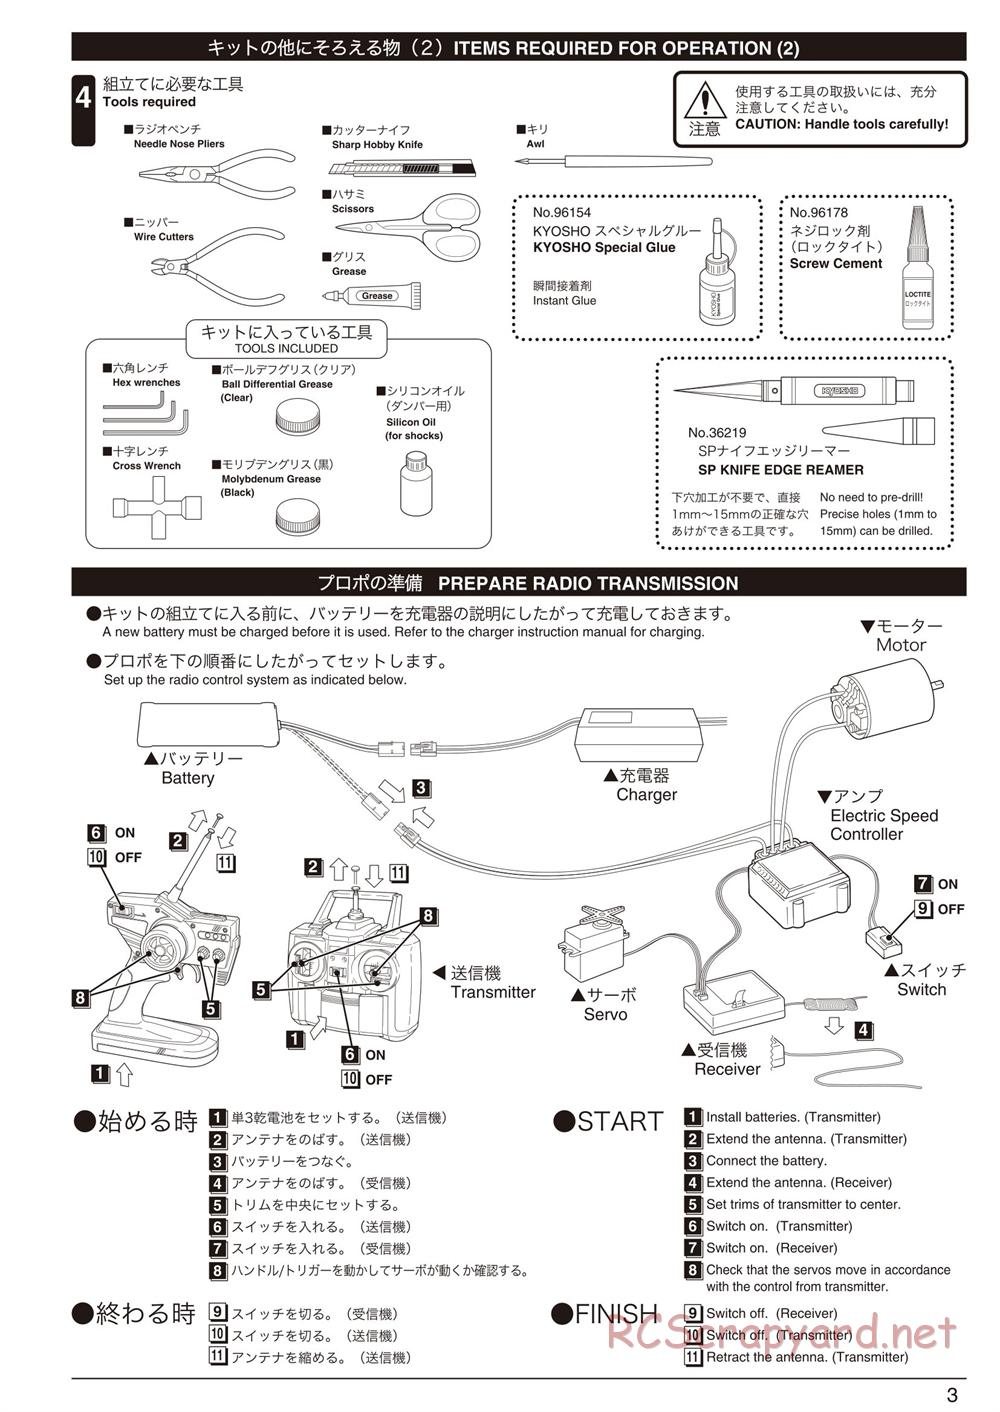 Kyosho - Ultima RB5 SP - Manual - Page 3